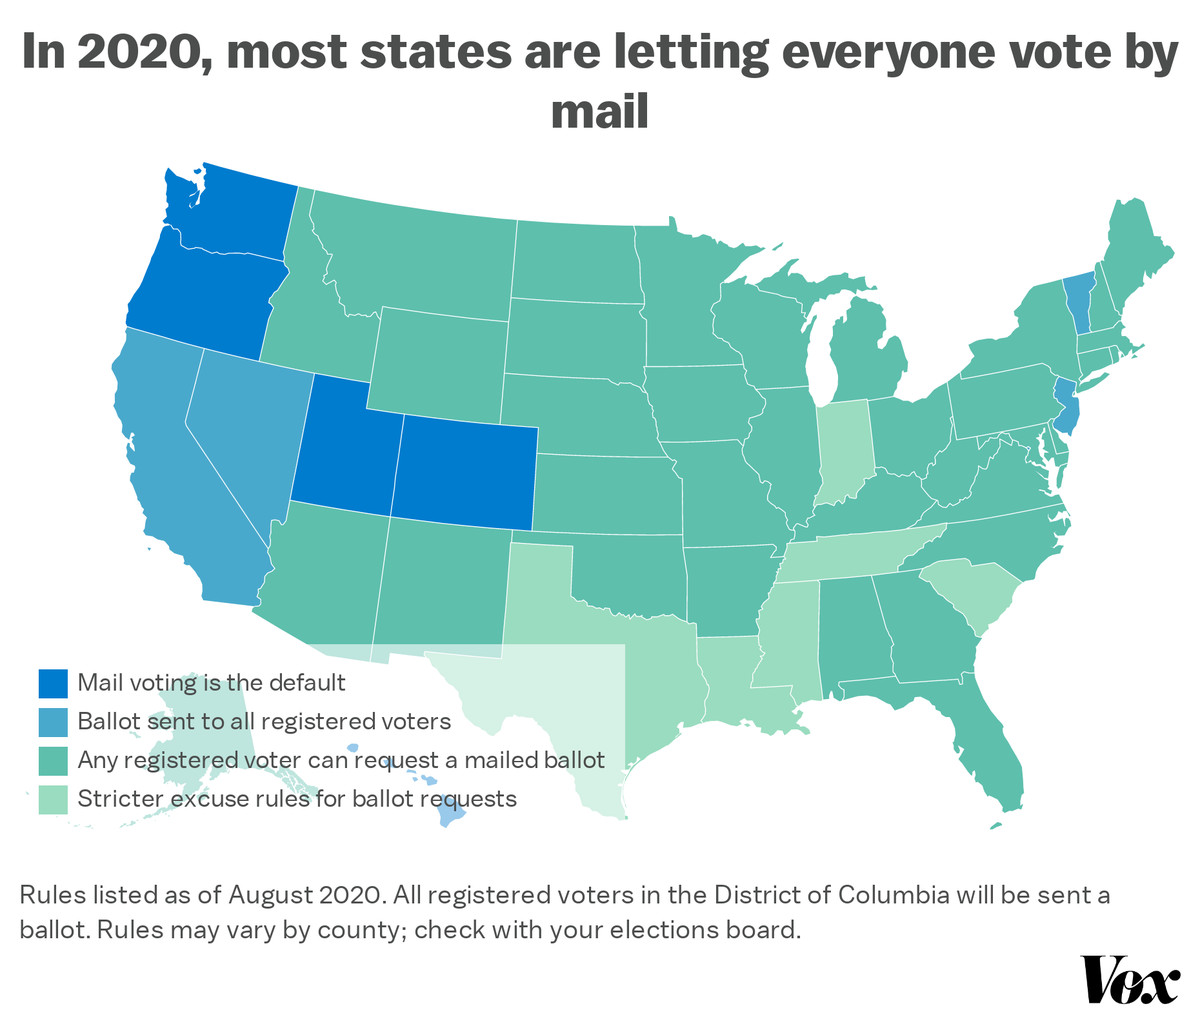 Map: “In 2020, most states are letting everyone vote by mail”